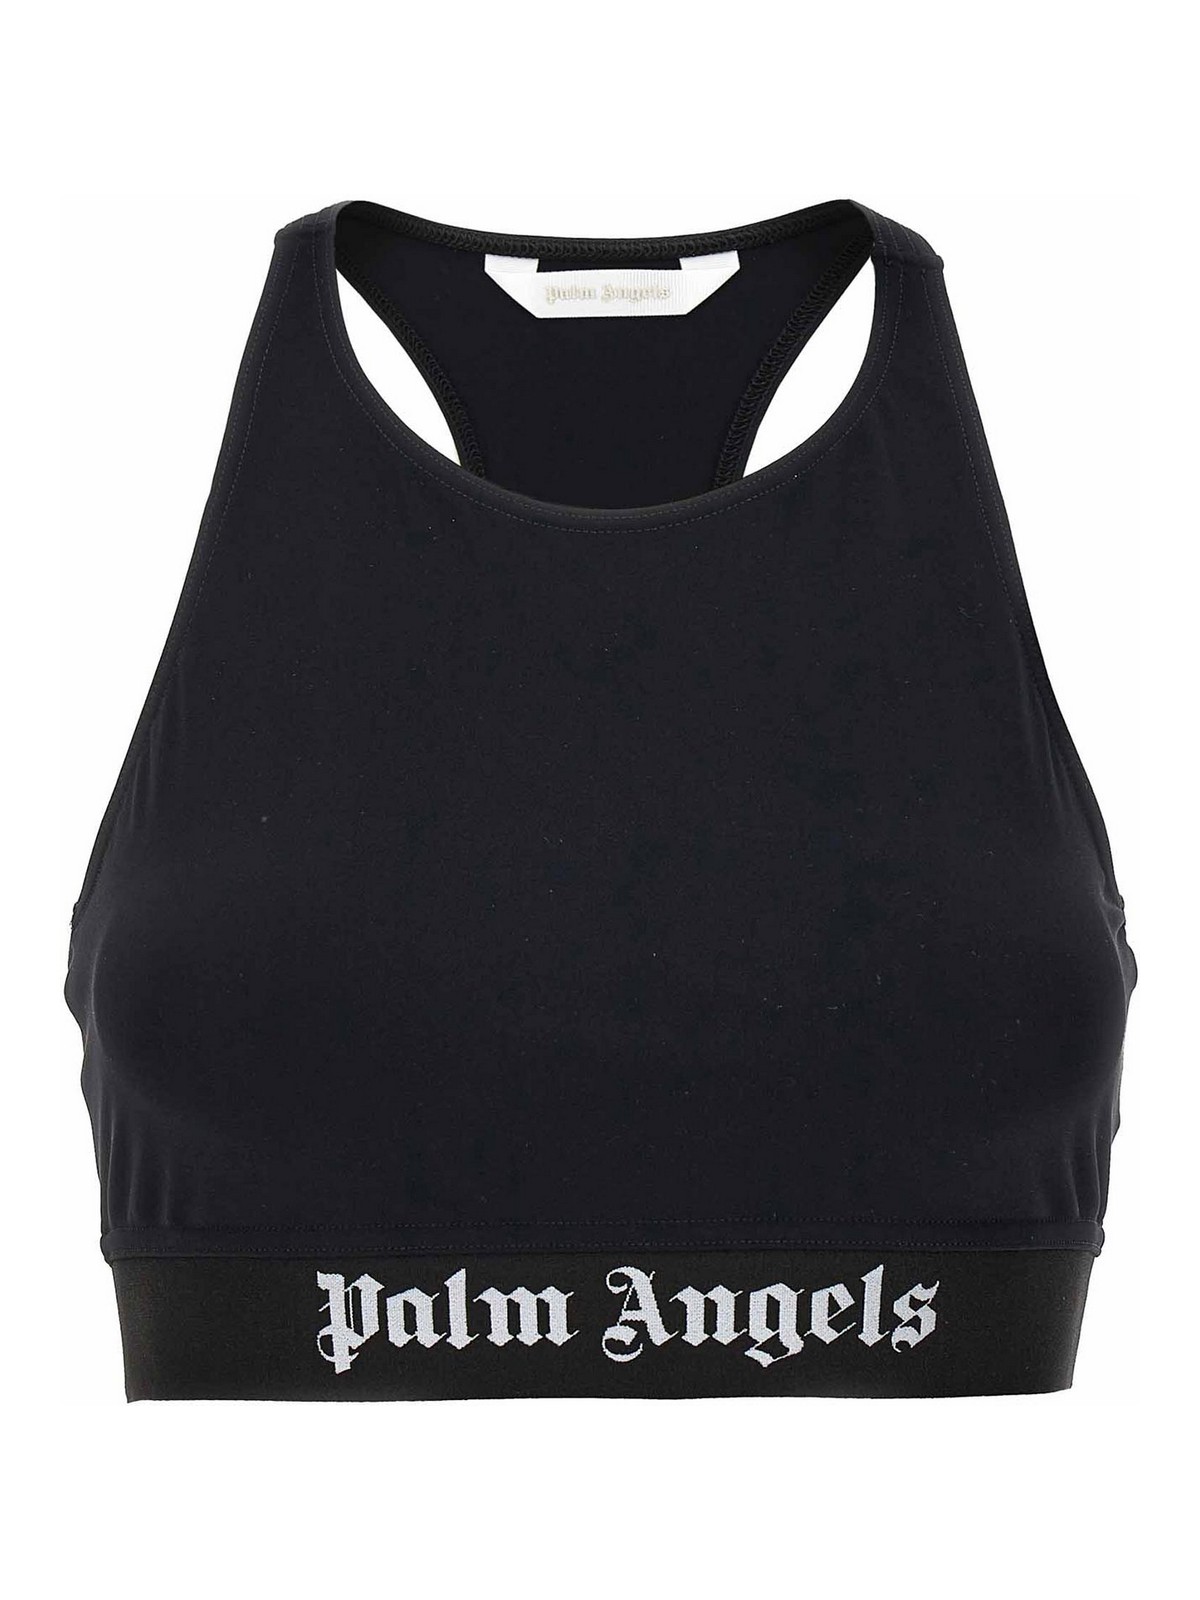 Shop Palm Angels Logo Sports Top In Black